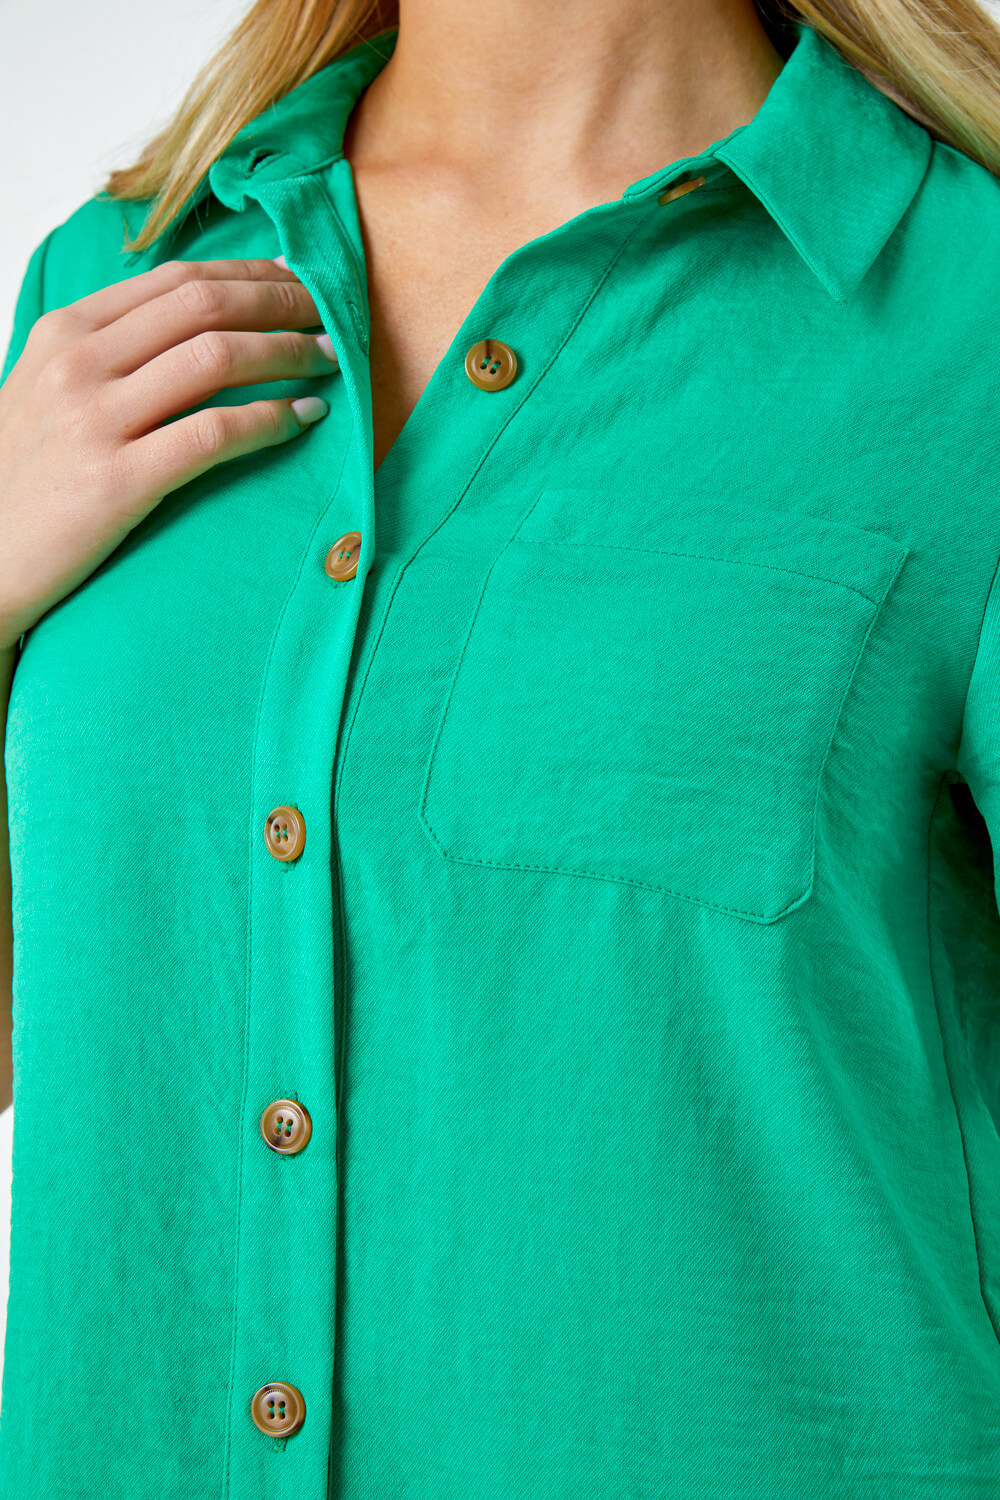 Green Petite Button Up Pocket Shirt, Image 5 of 5